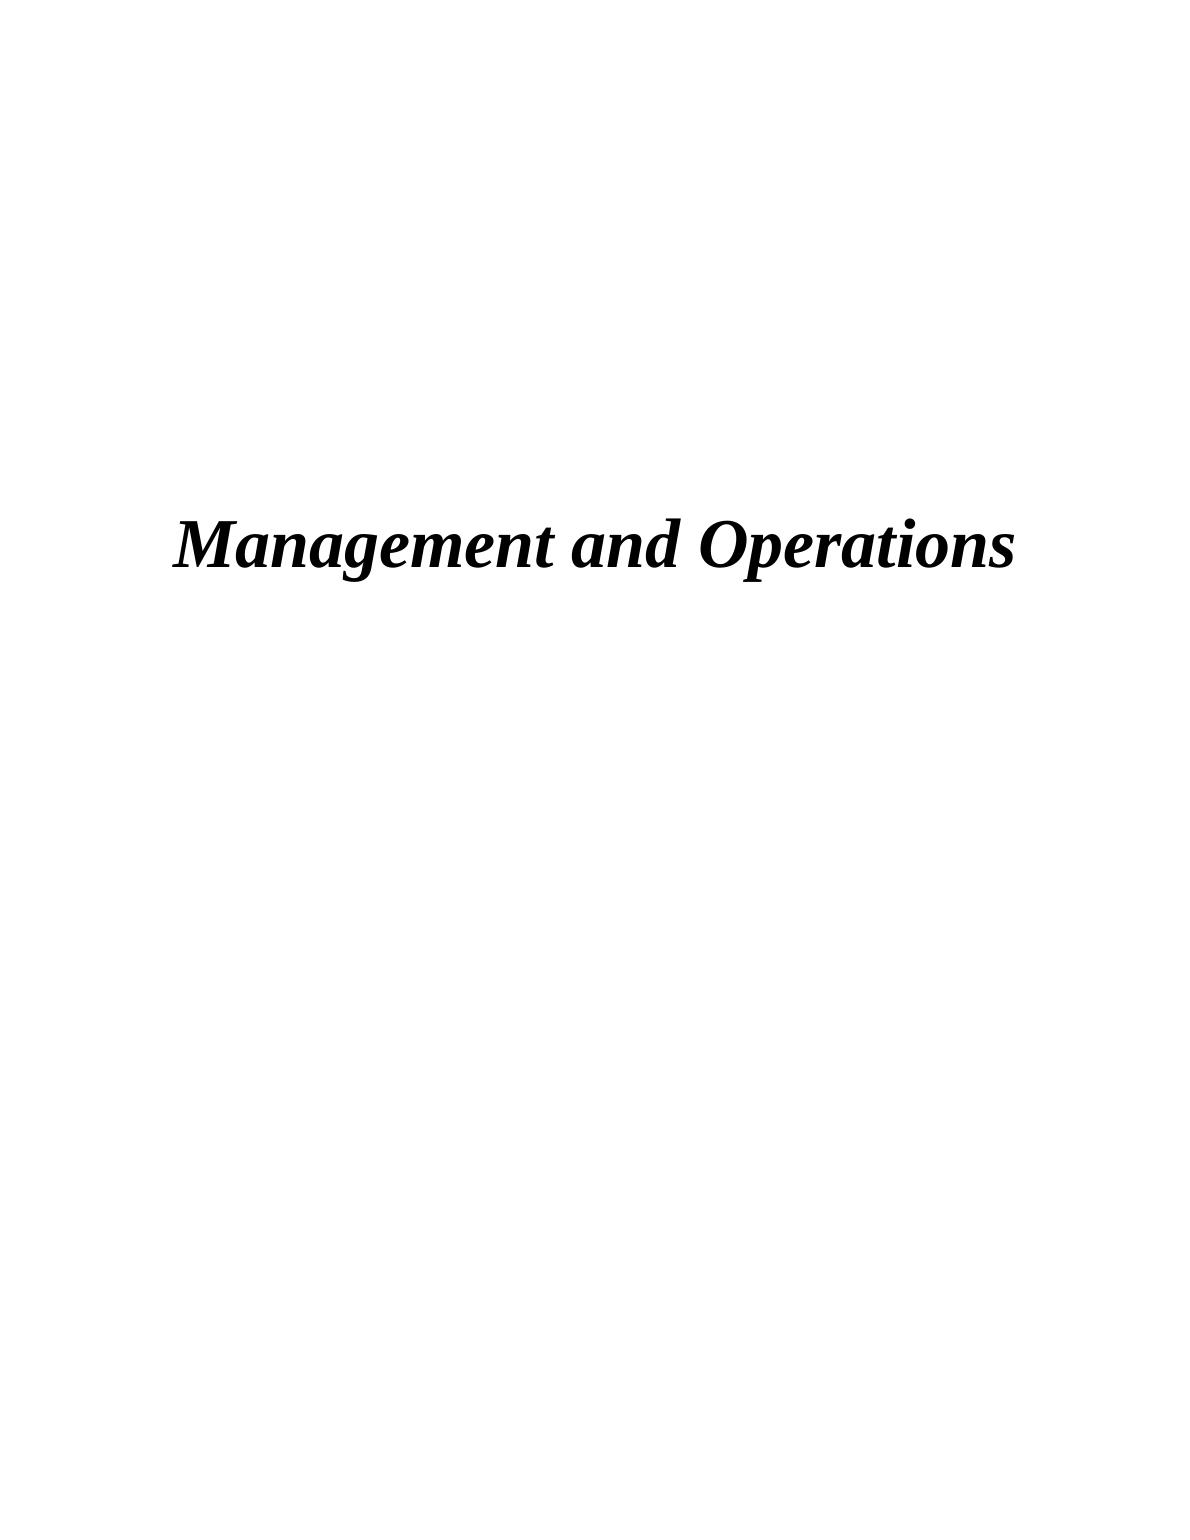 Operations Management of Marks and Spencer_1